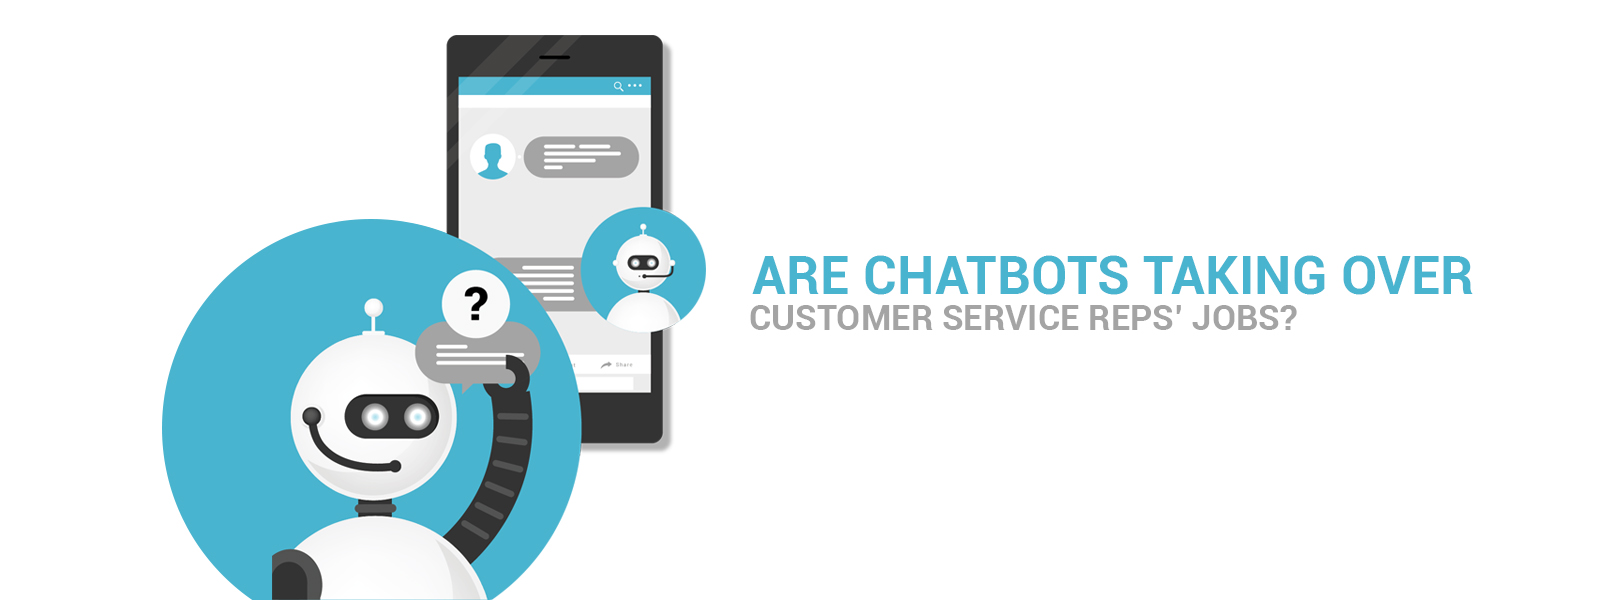 are chatbots taking over customer service rep's jobs